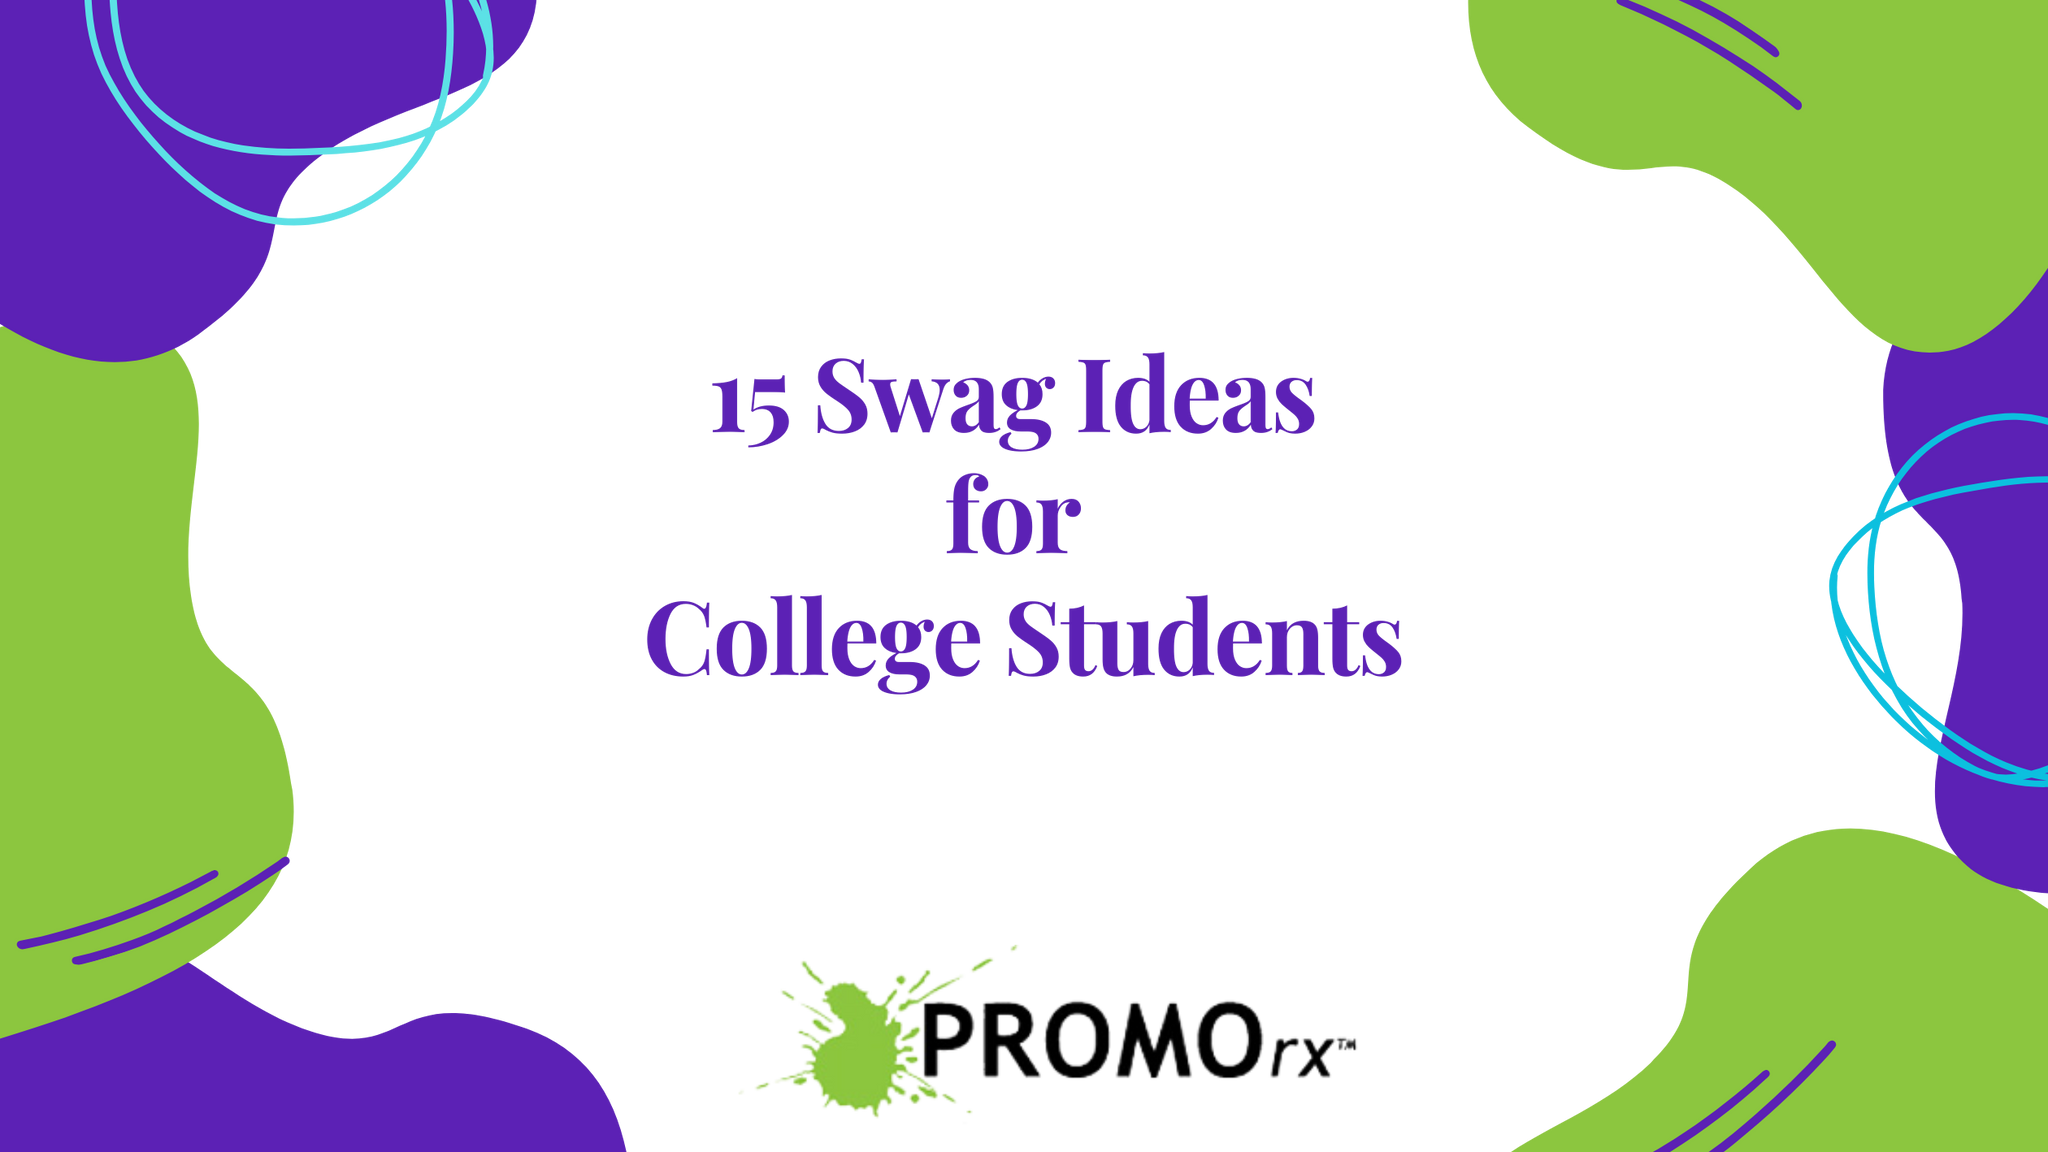 15 Swag Ideas for College Students